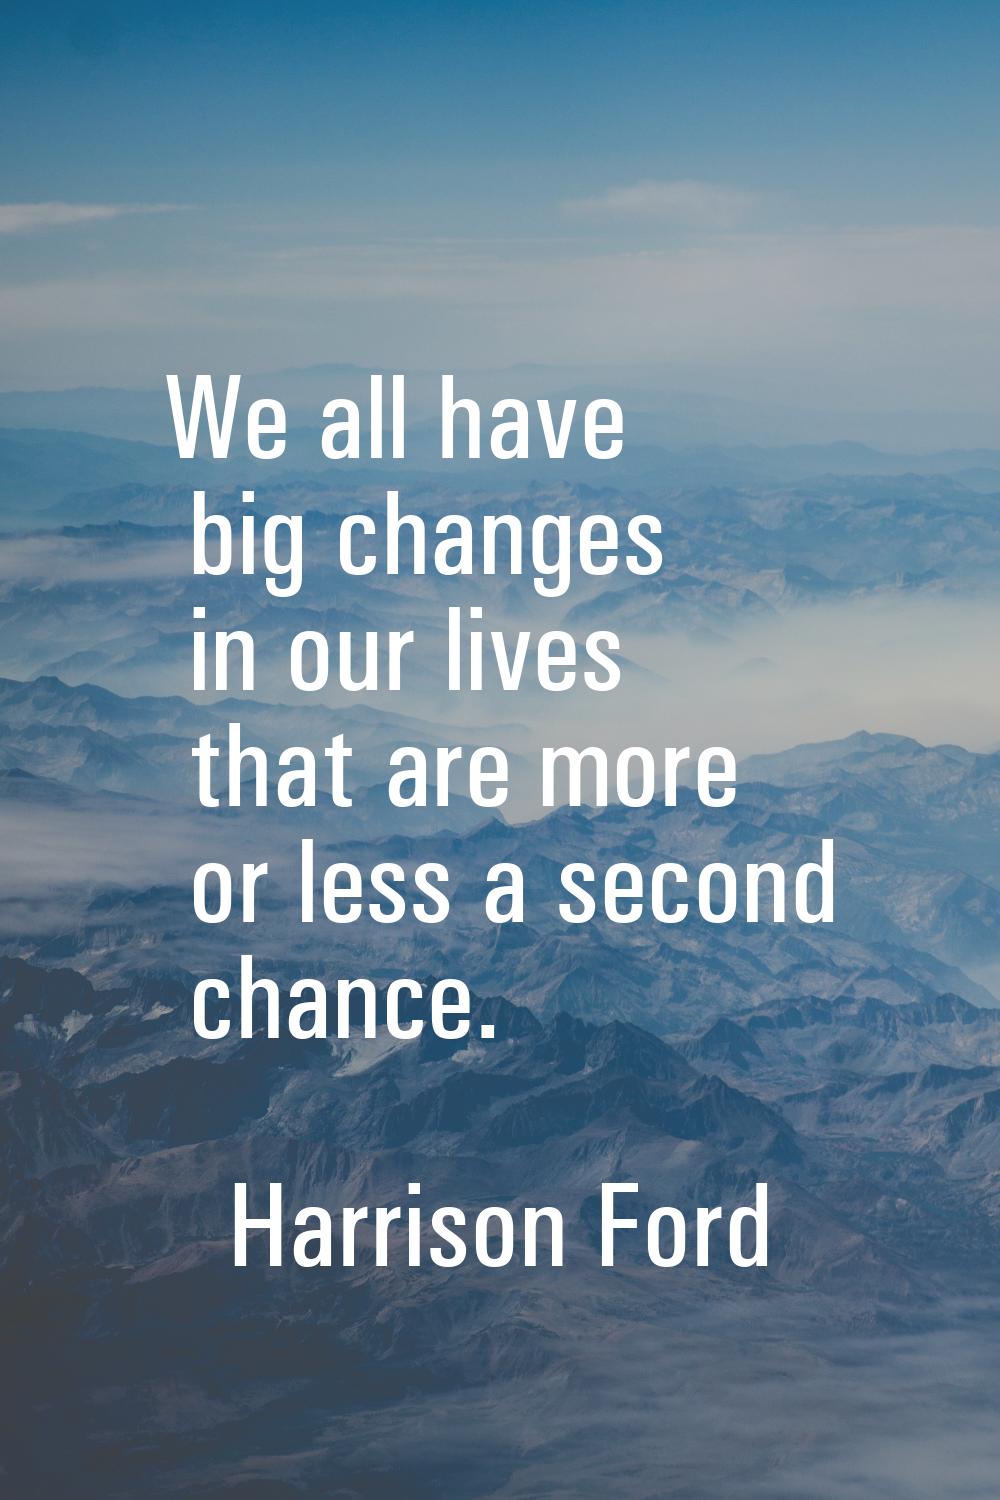 We all have big changes in our lives that are more or less a second chance.